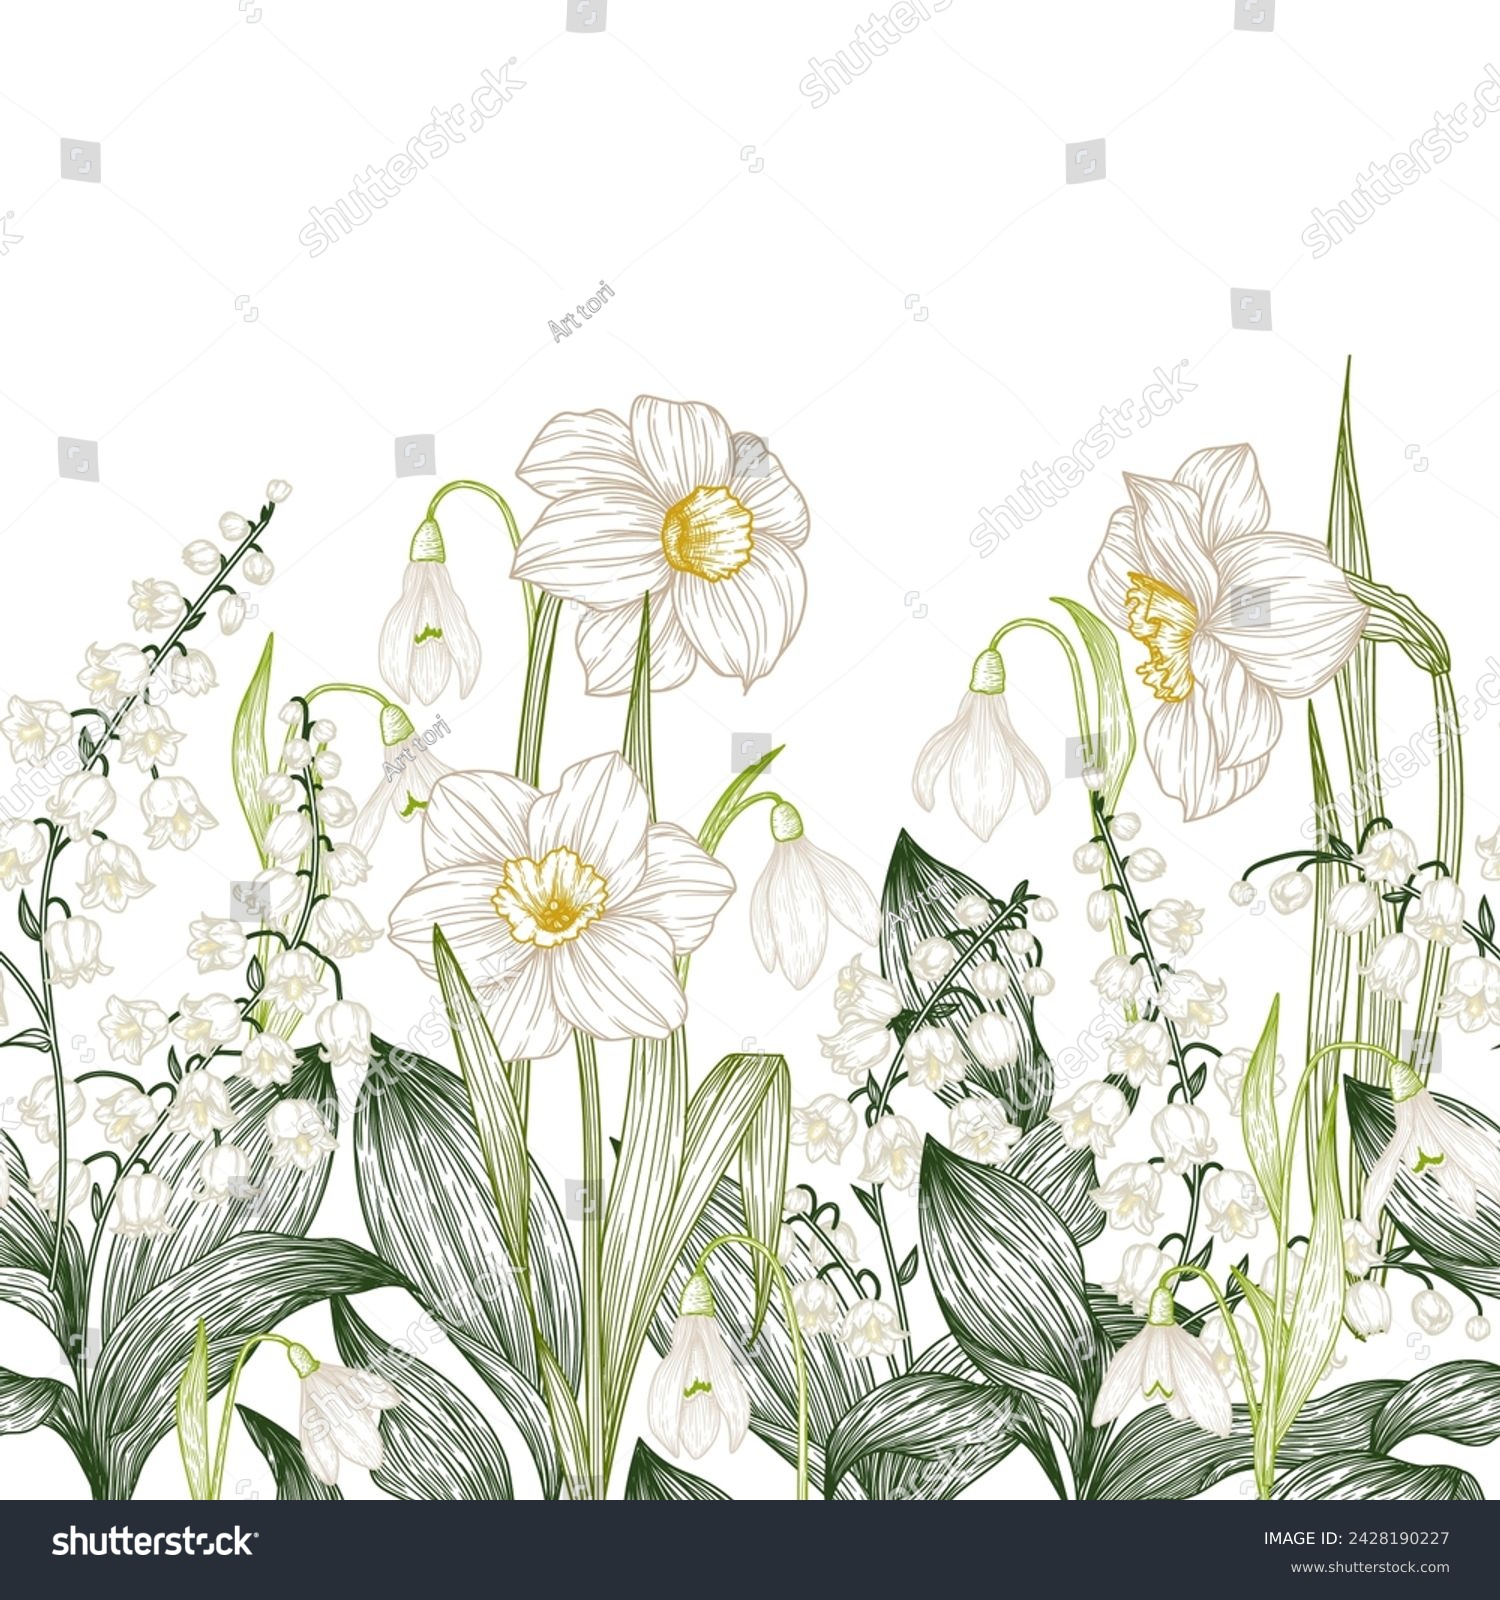 SVG of Horizontal seamless vector pattern with spring flowers. Daffodils, snowdrops and lilies of the valley svg